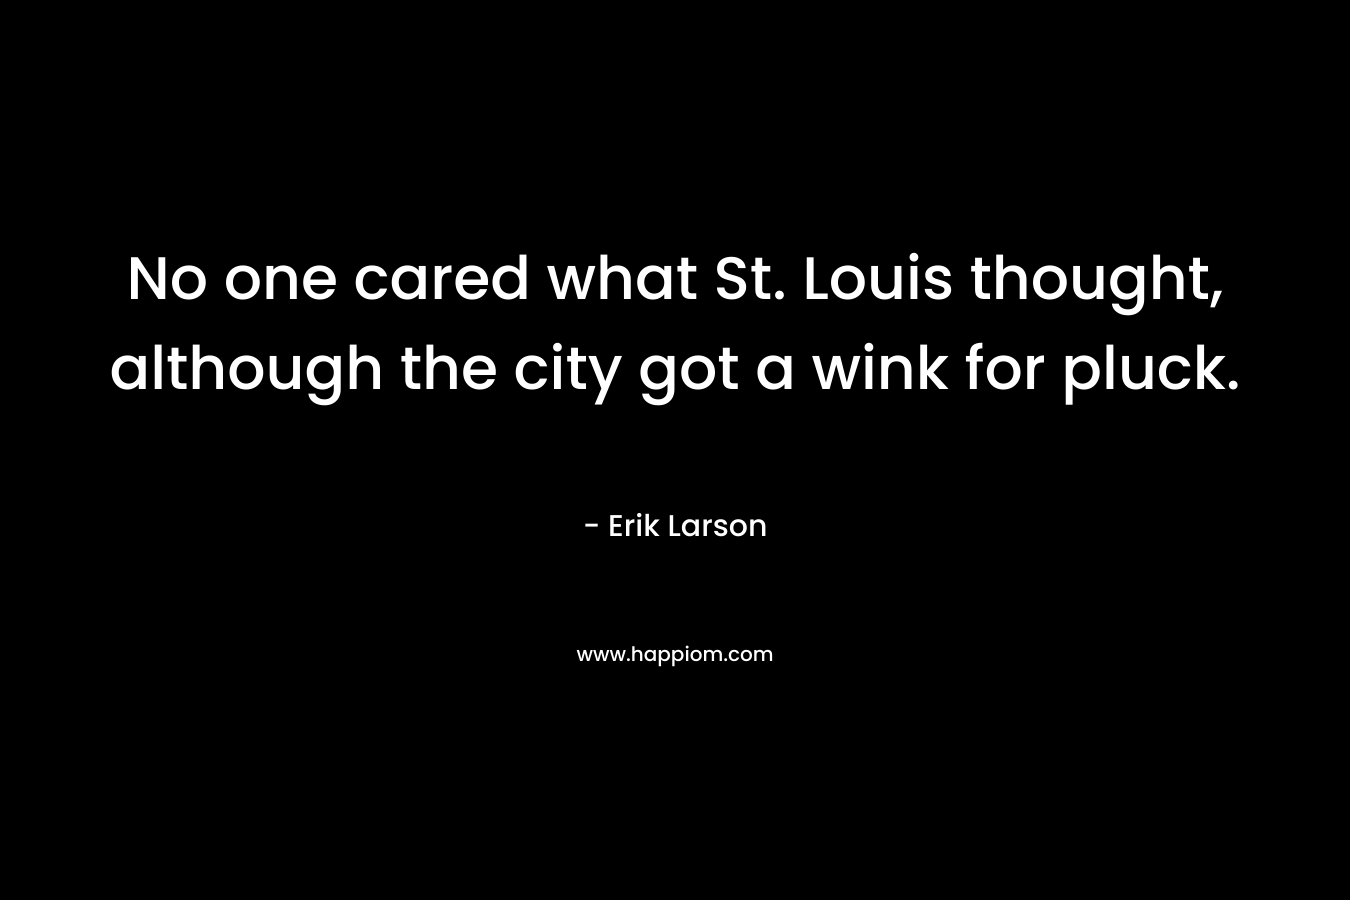 No one cared what St. Louis thought, although the city got a wink for pluck.